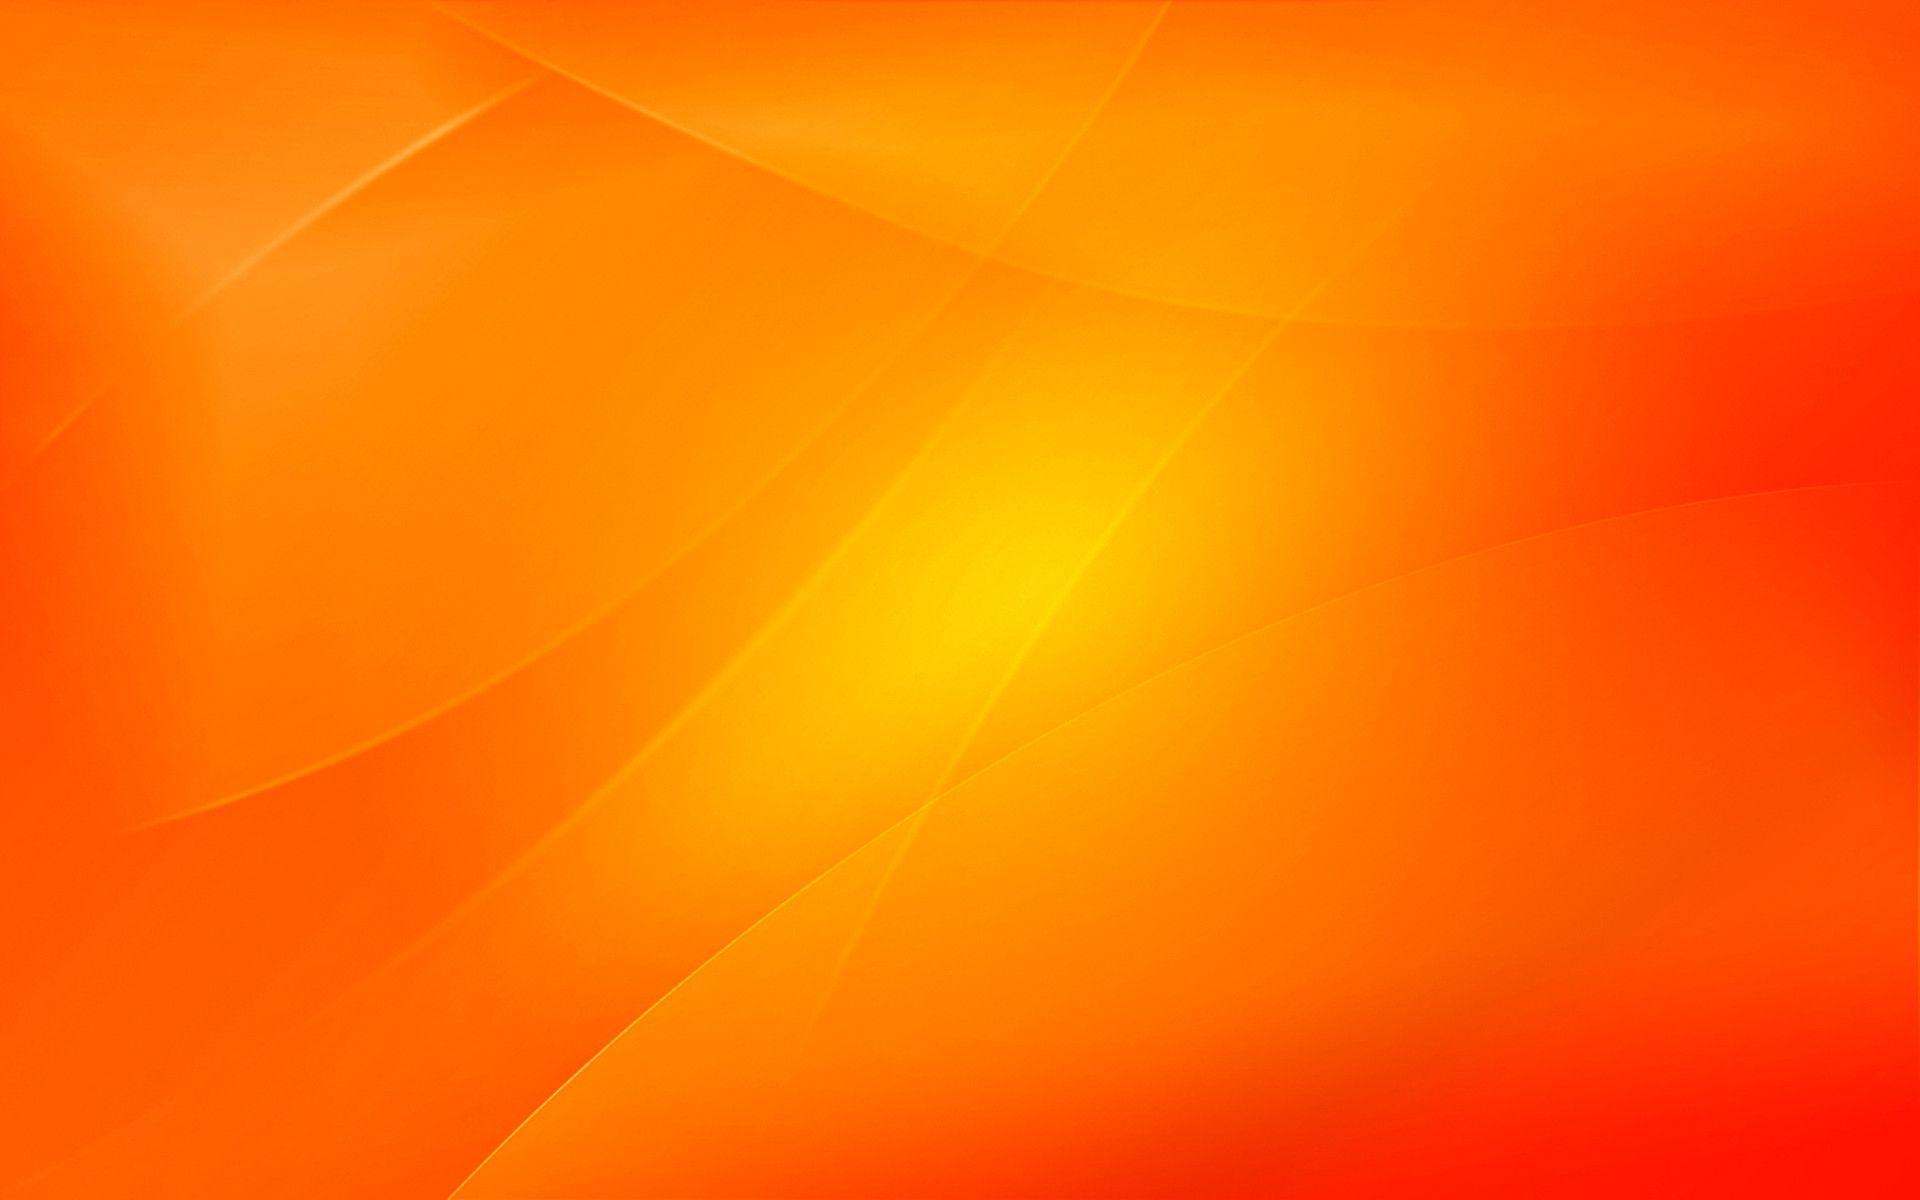 Gallery For Gt Cool Neon Orange Background